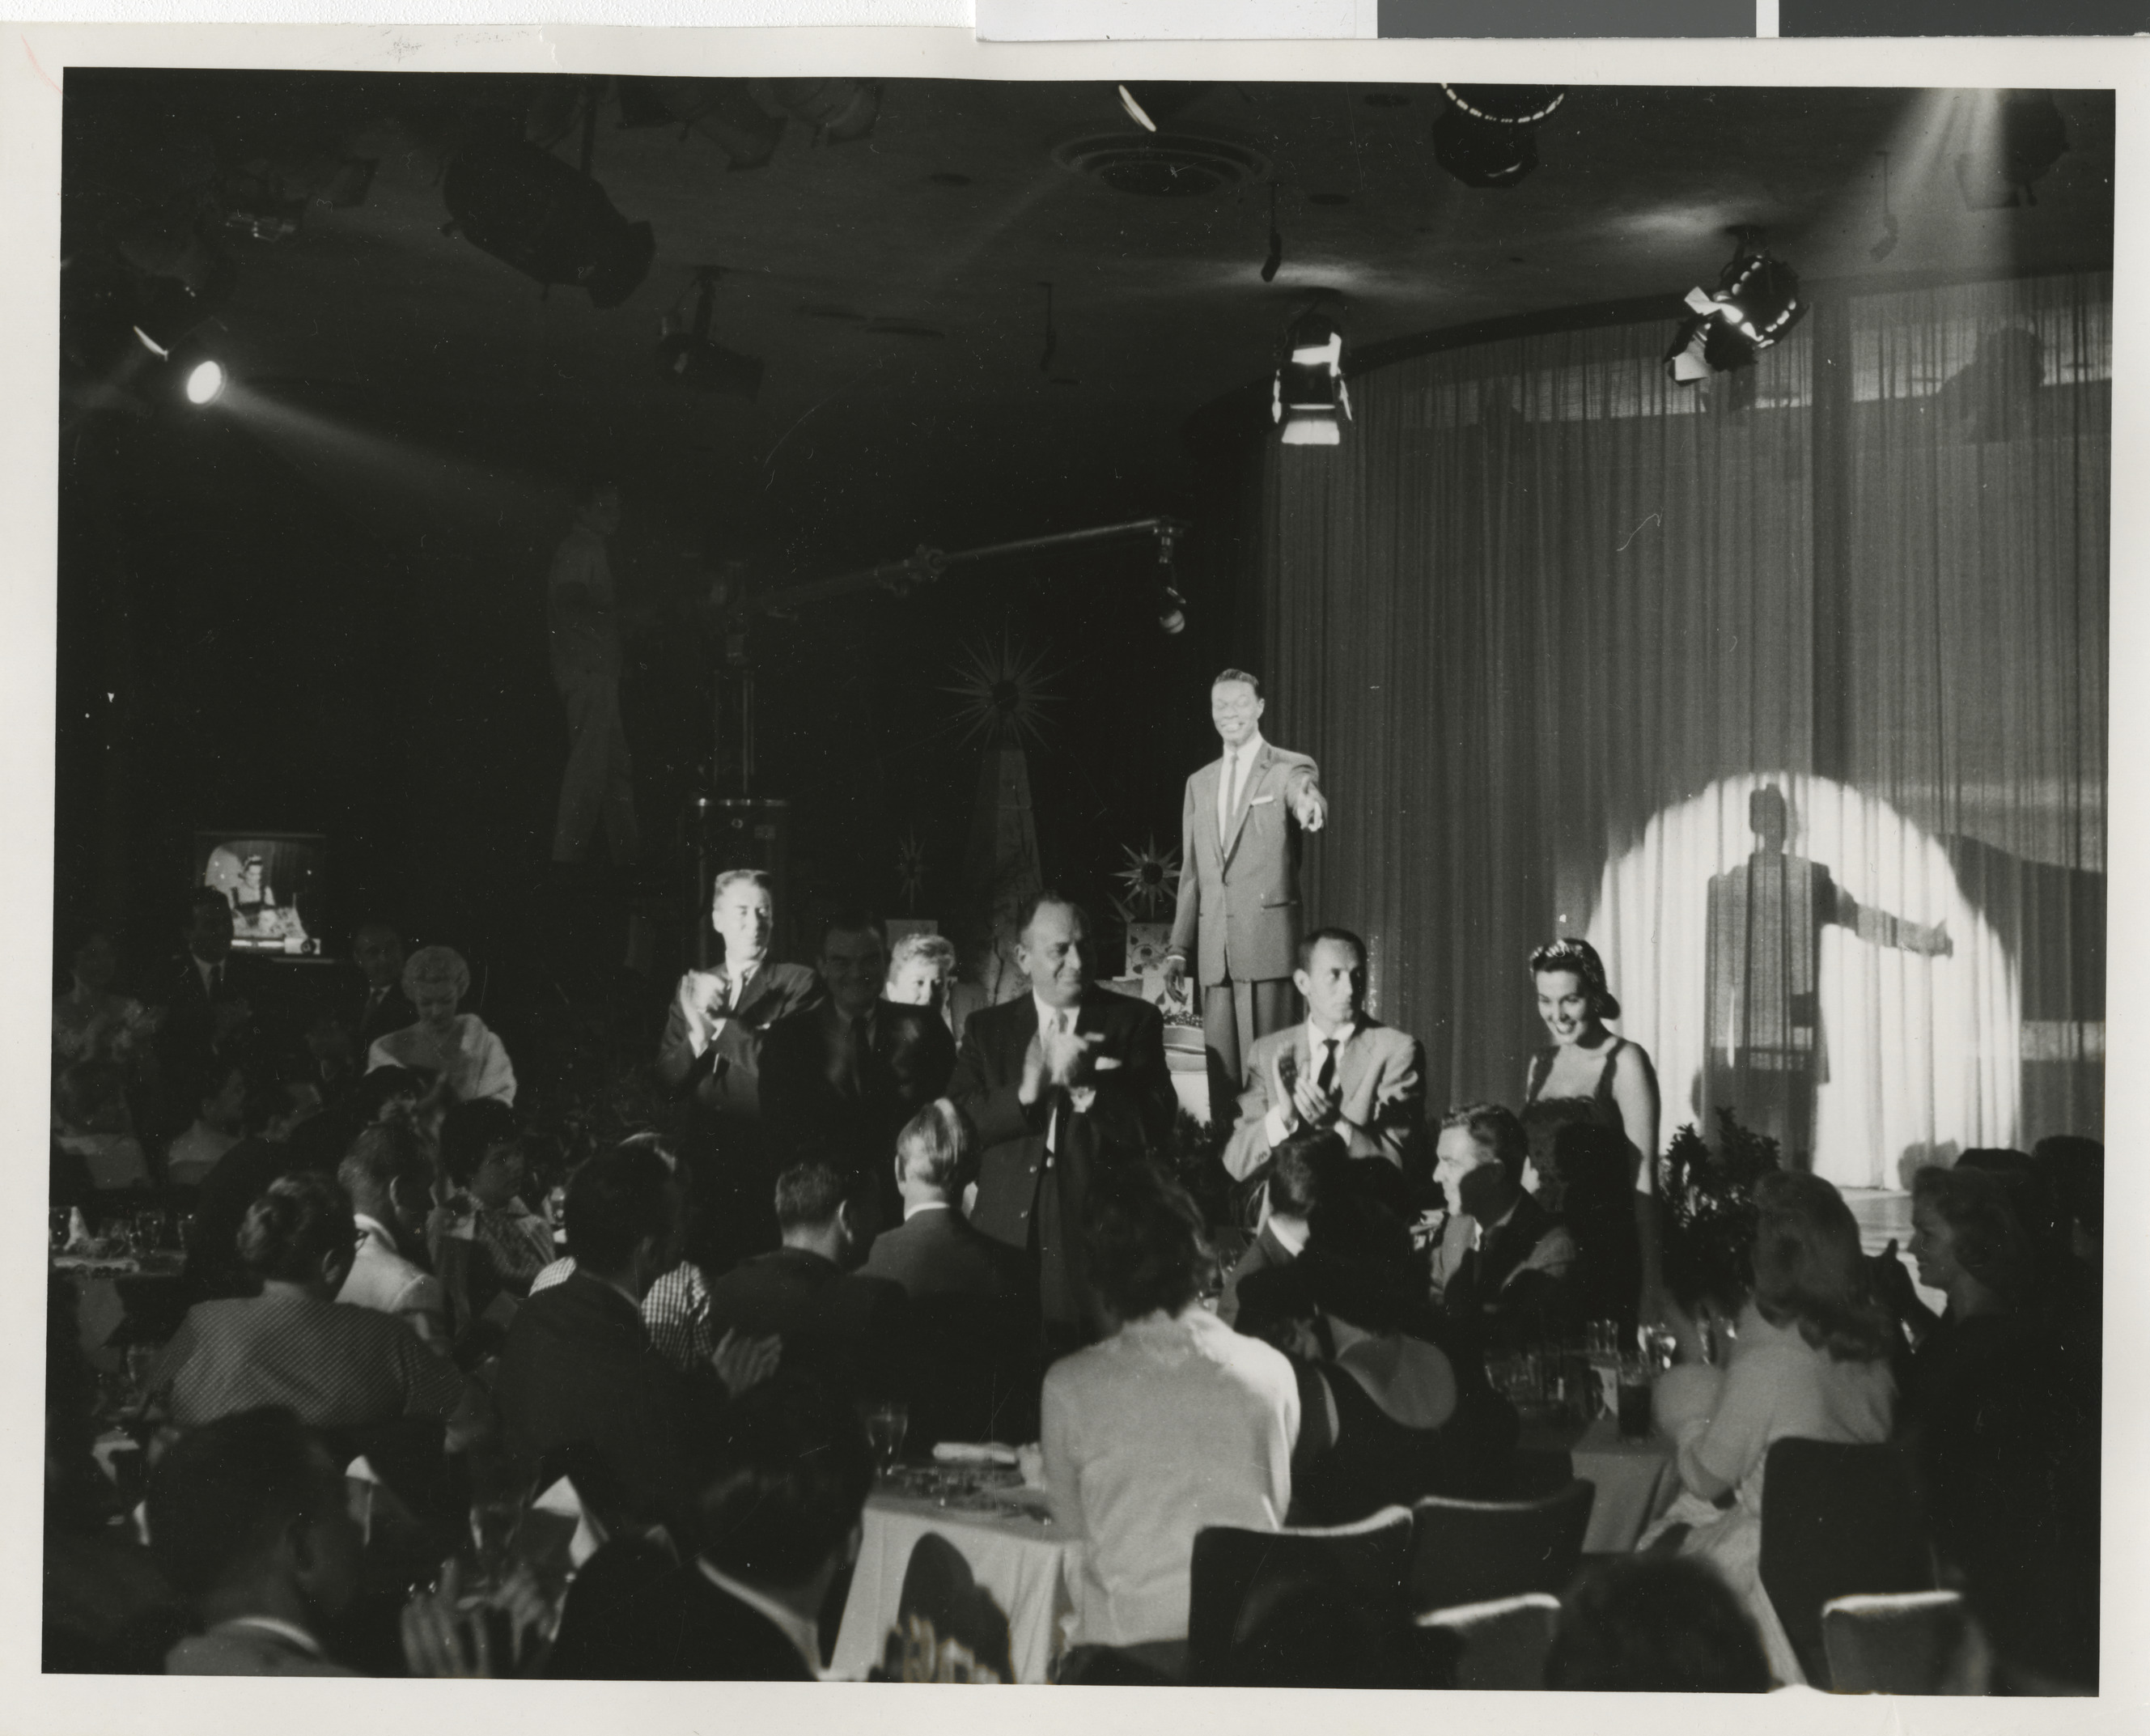 Cole onstage, image 043